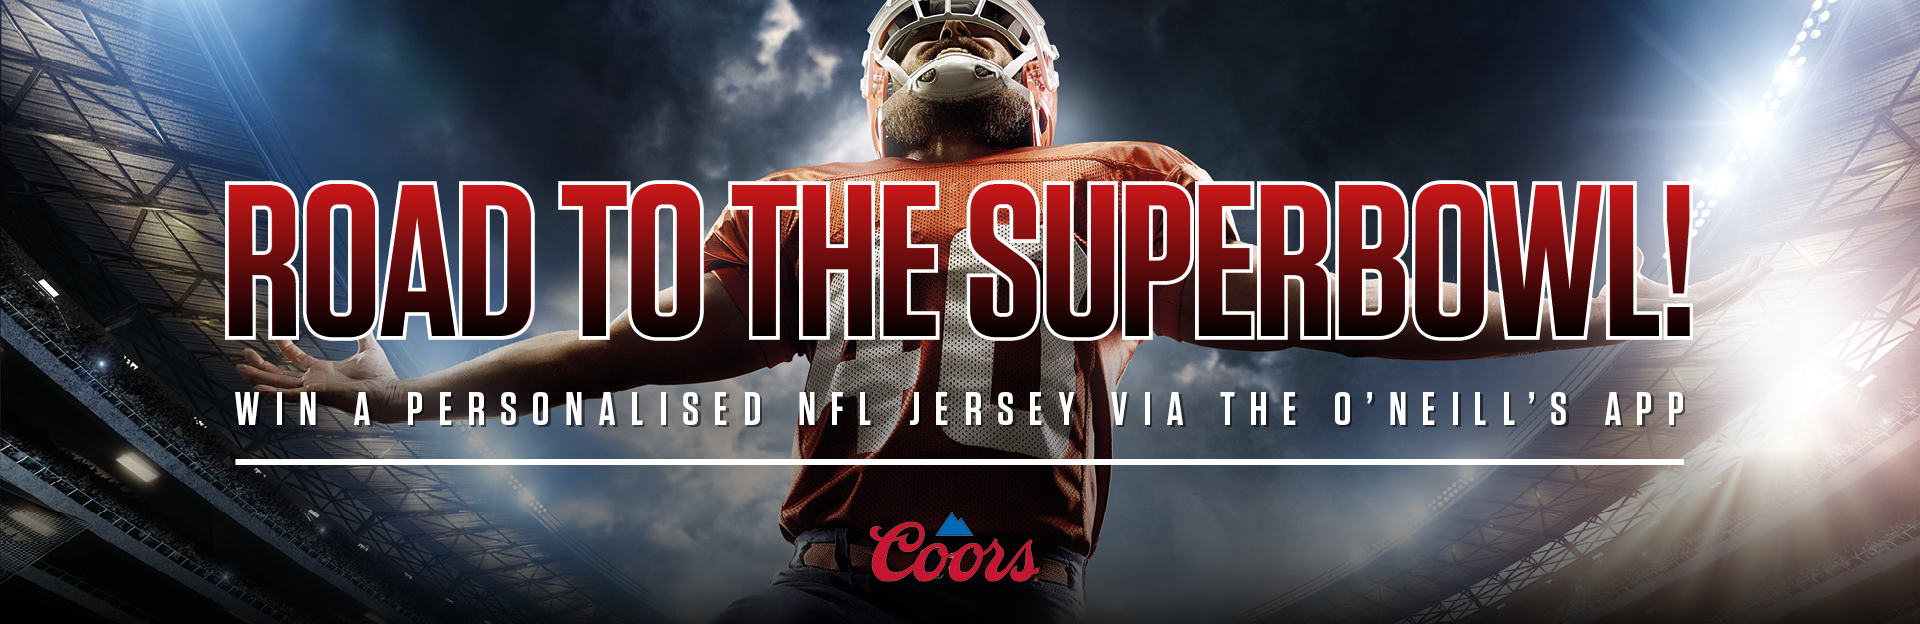 Watch NFL at The Bull